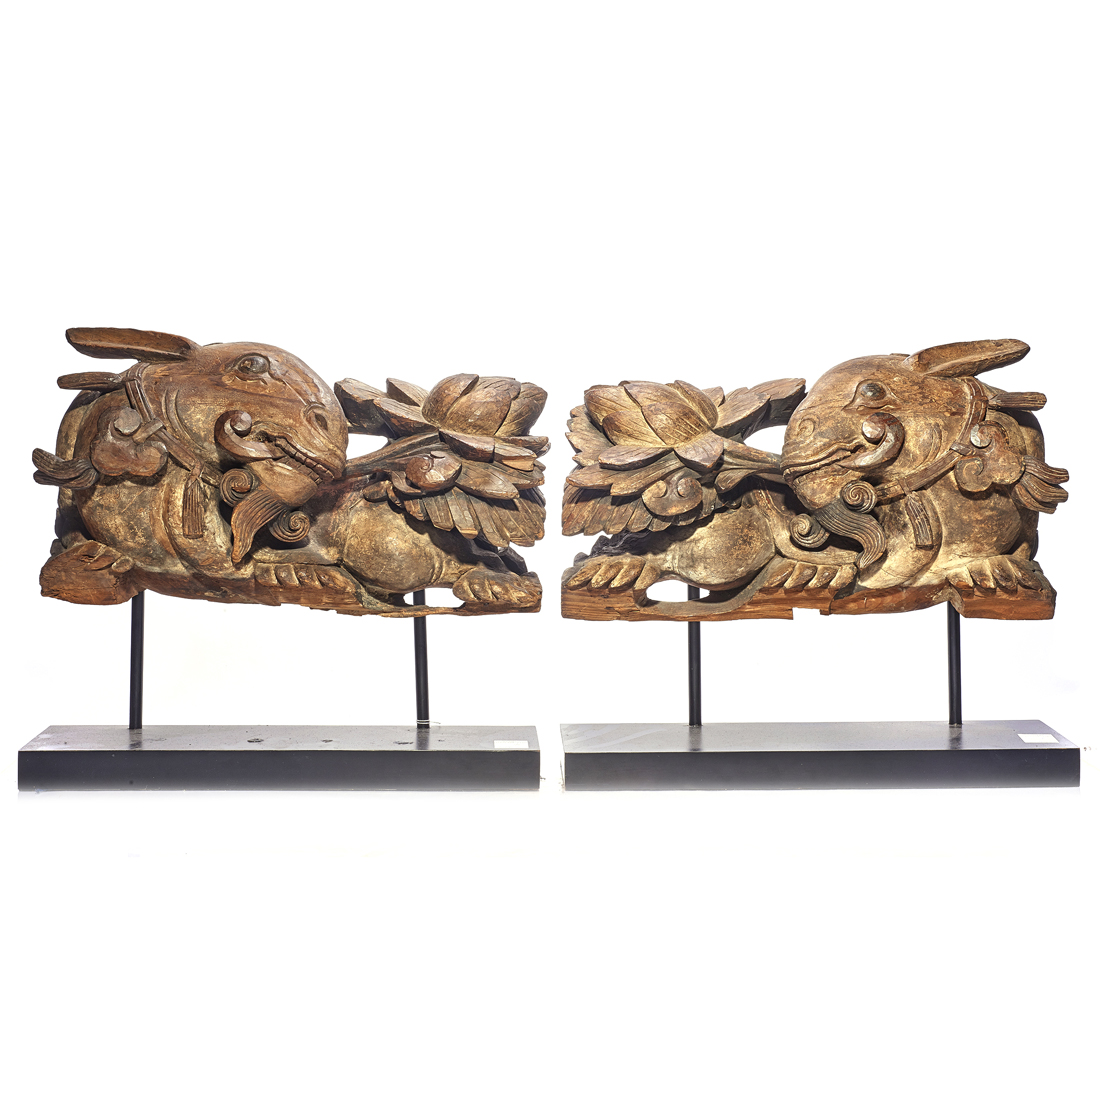 PAIR OF ASIAN ARCHITECTURAL WOOD